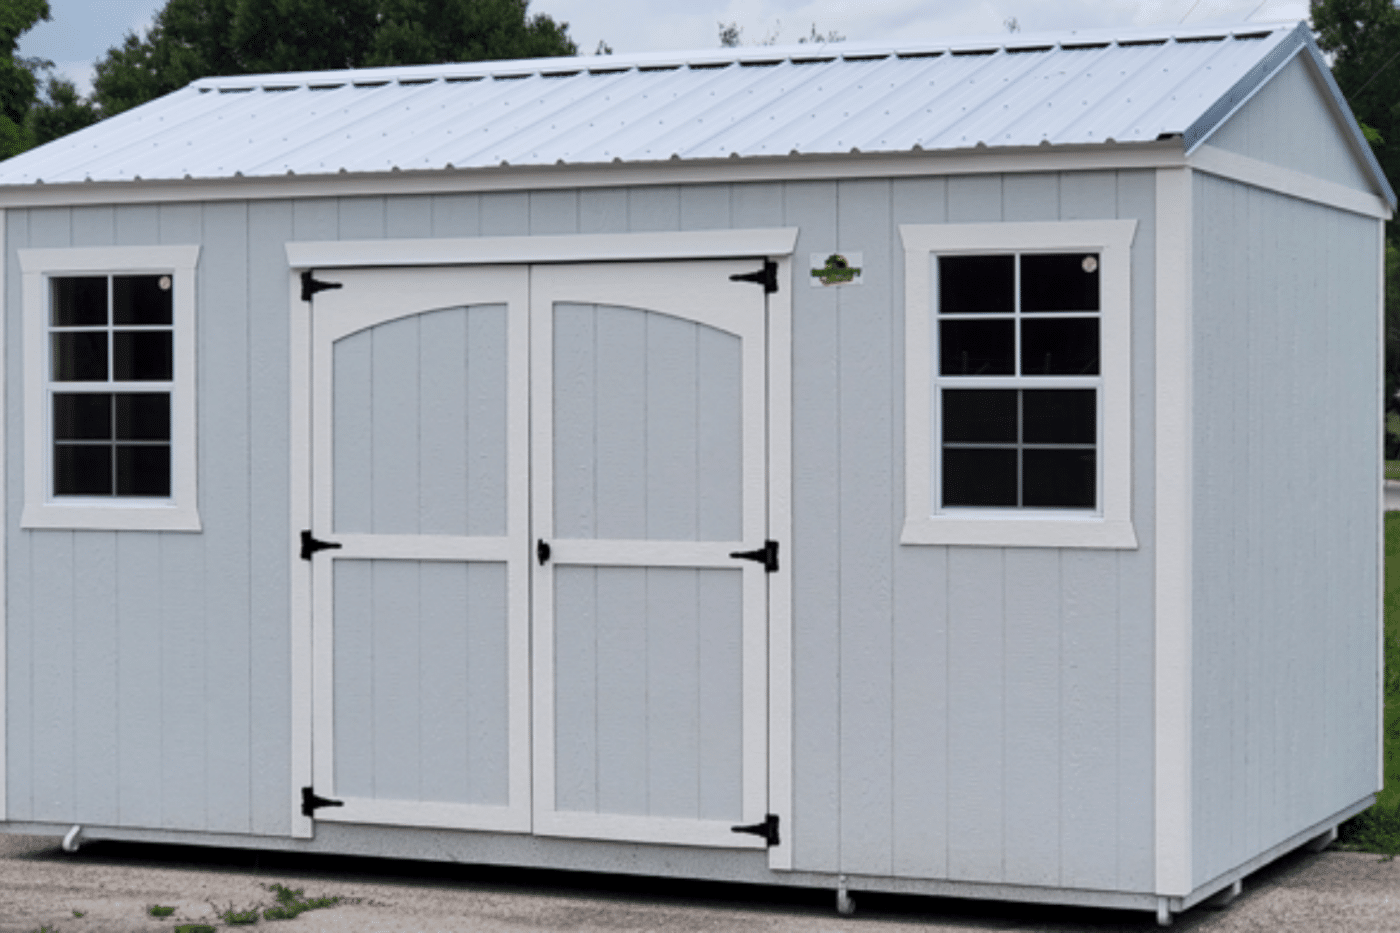 light blue side gable shed with white trim for sale in south florida